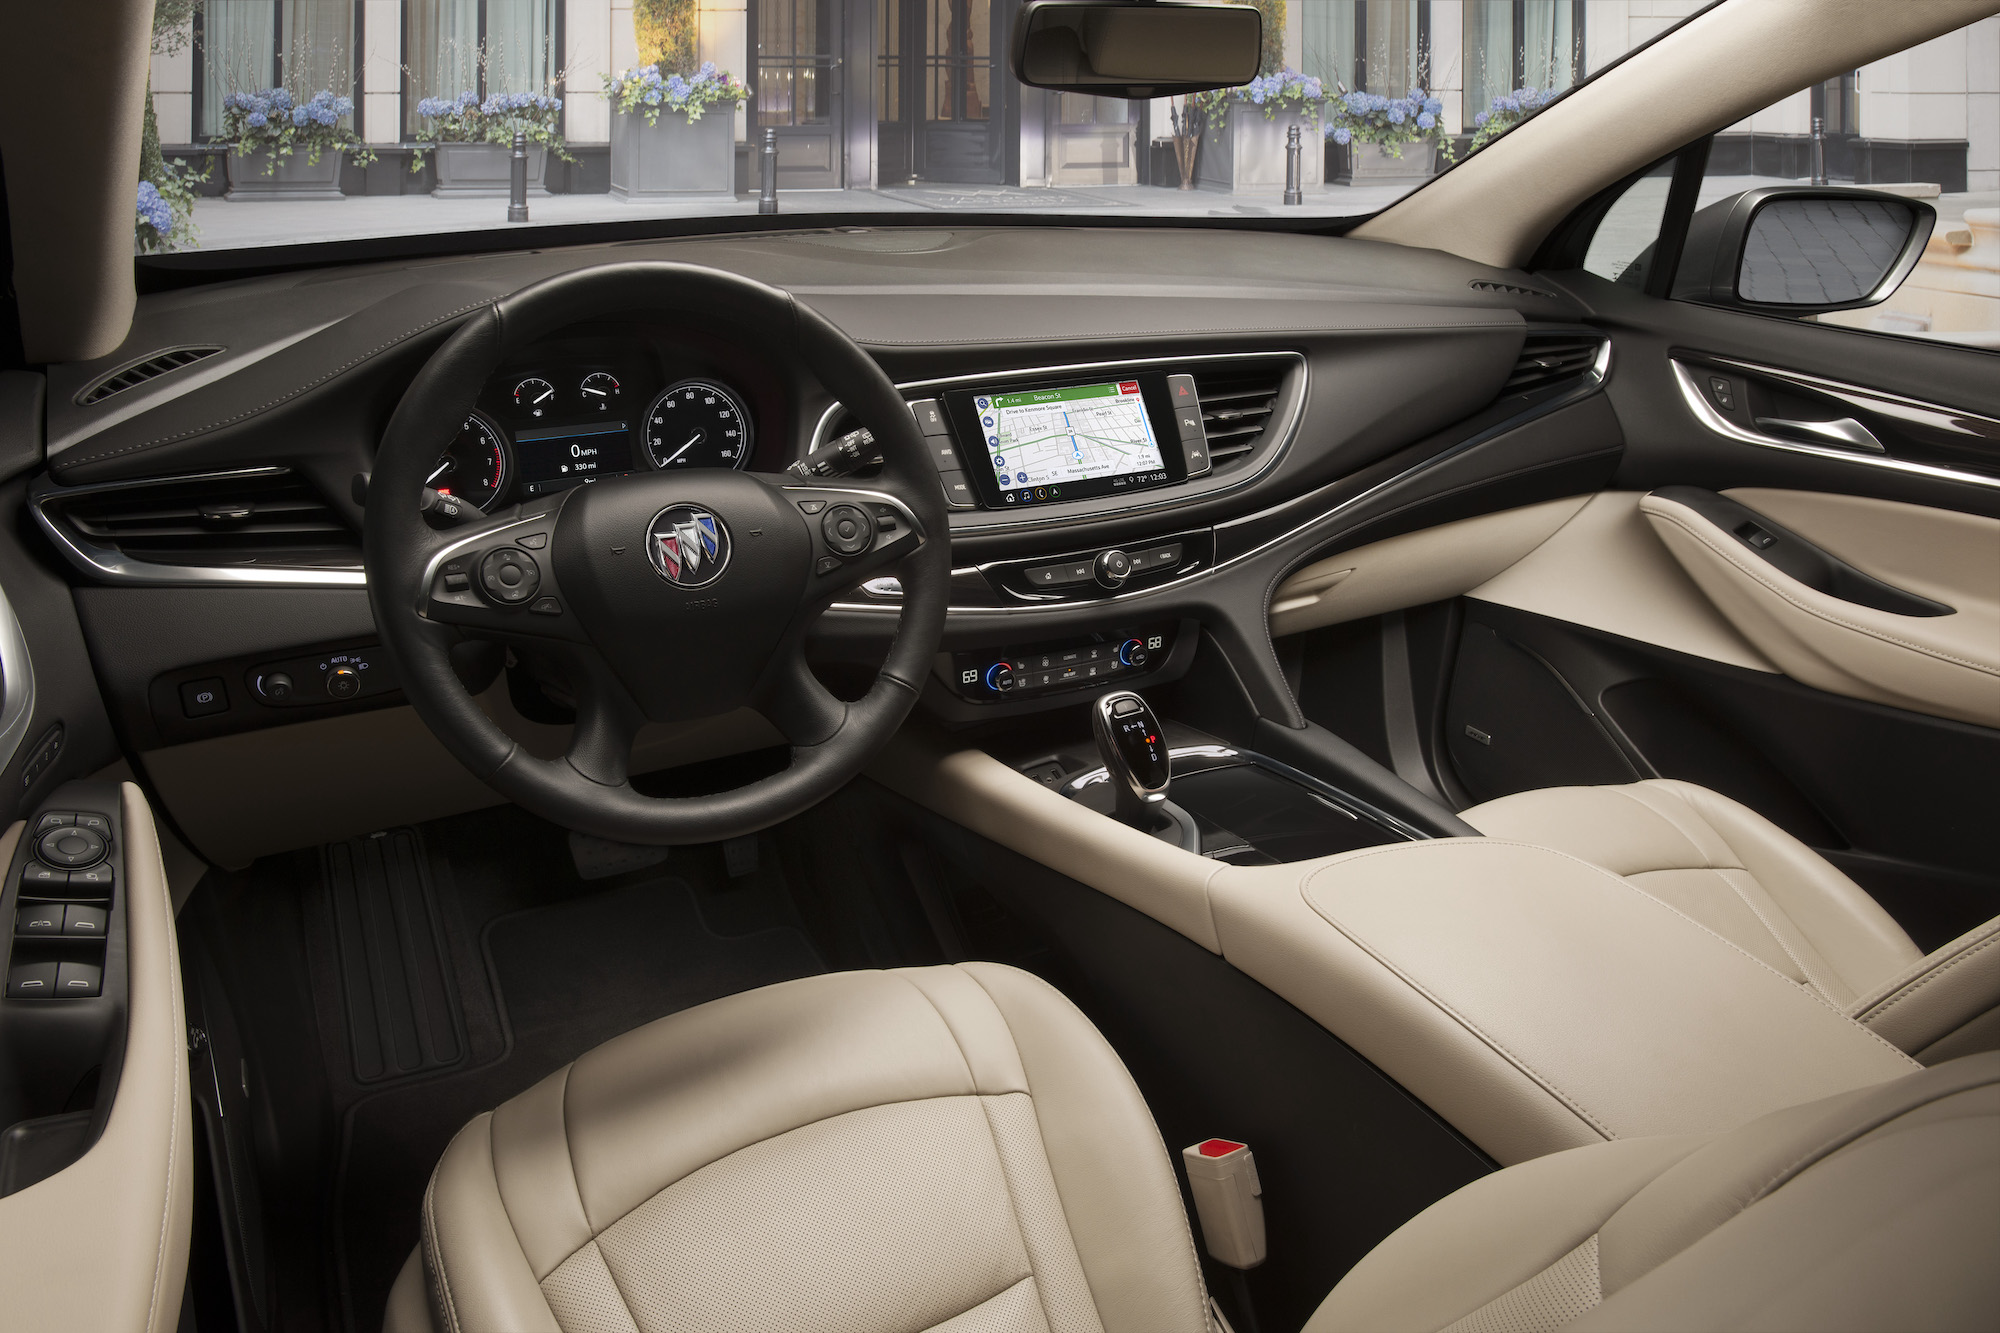 The beige and black interior of a 2021 Buick Enclave luxury midsize SUV